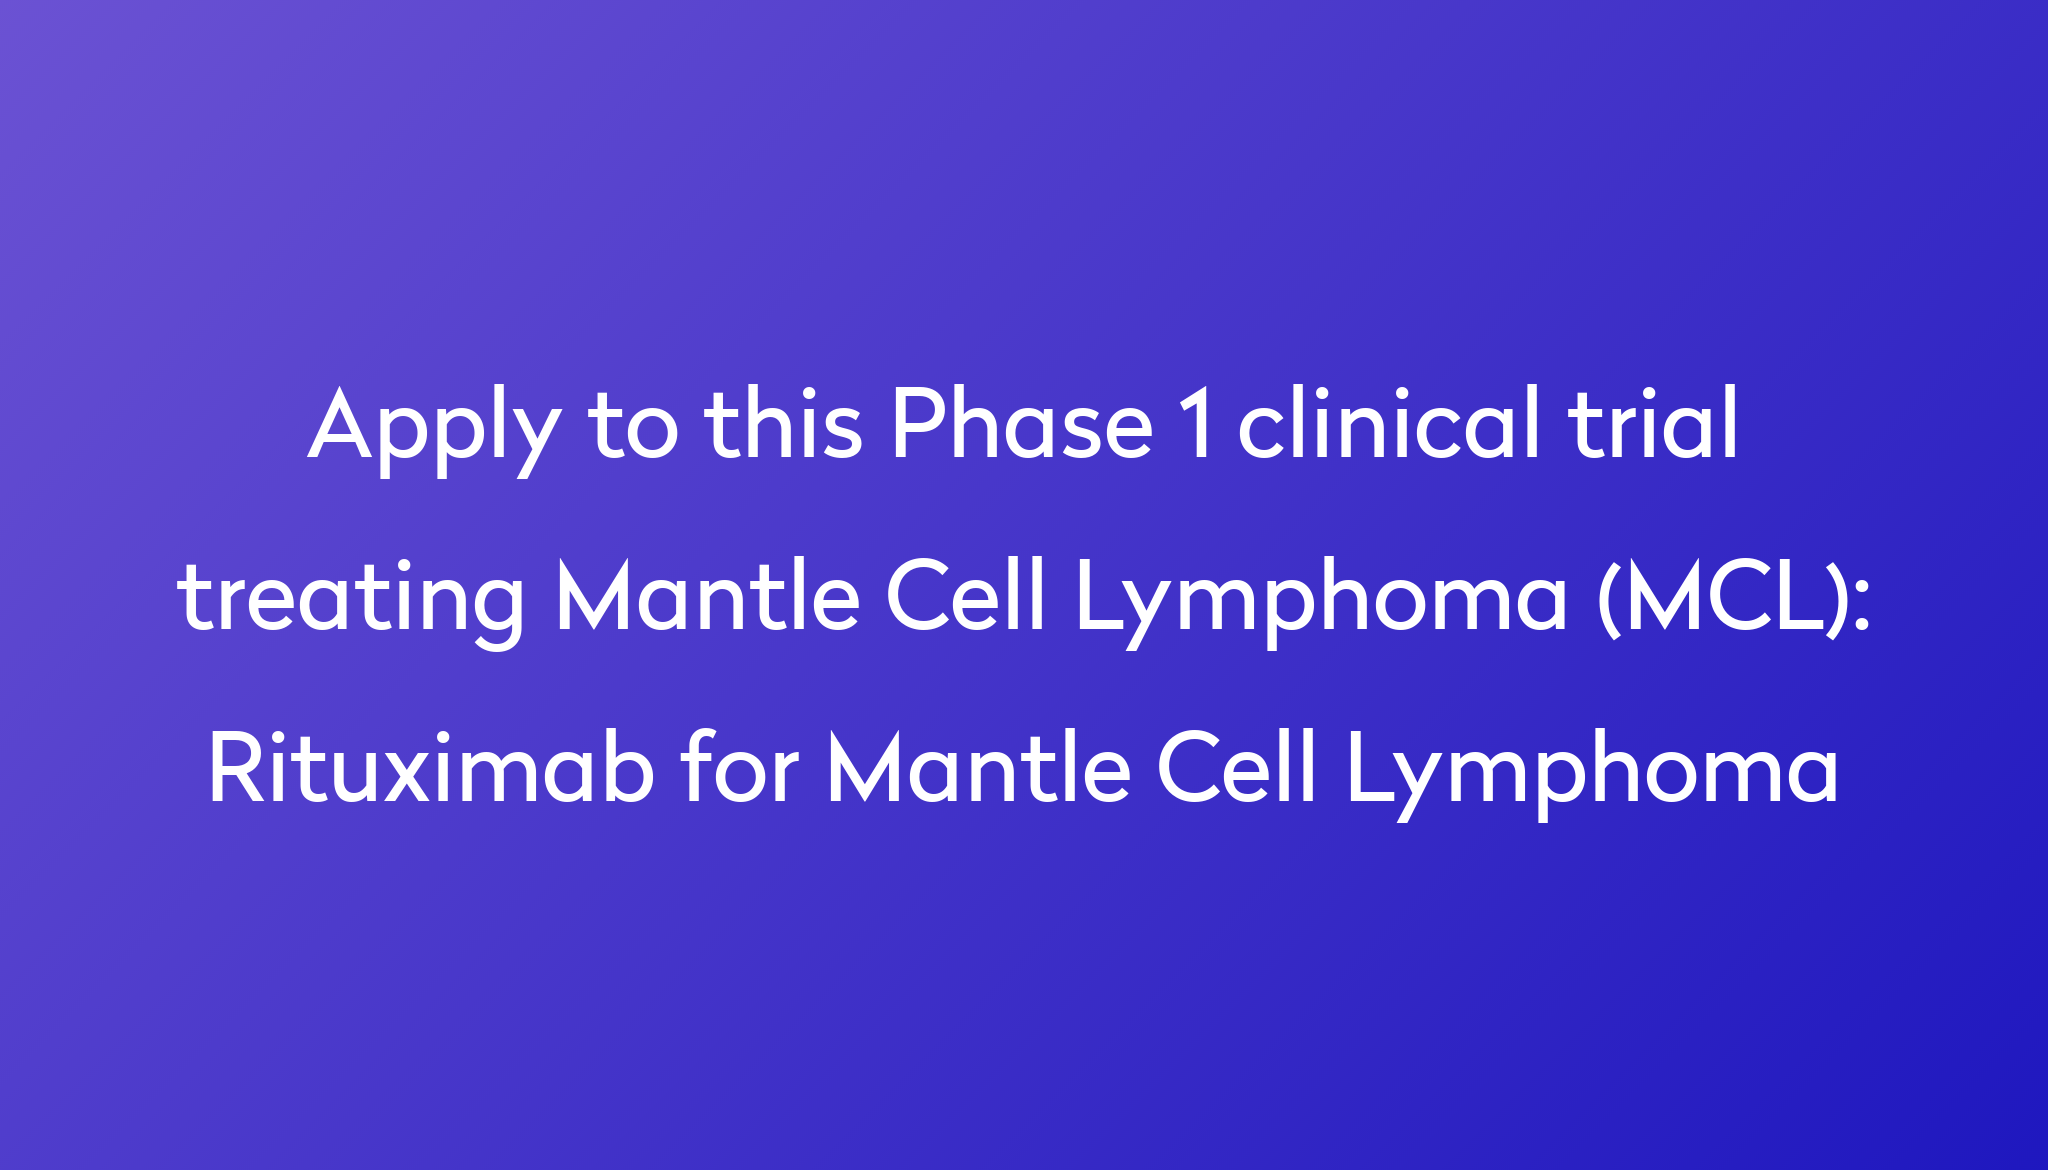 Rituximab for Mantle Cell Lymphoma Clinical Trial 2024 Power